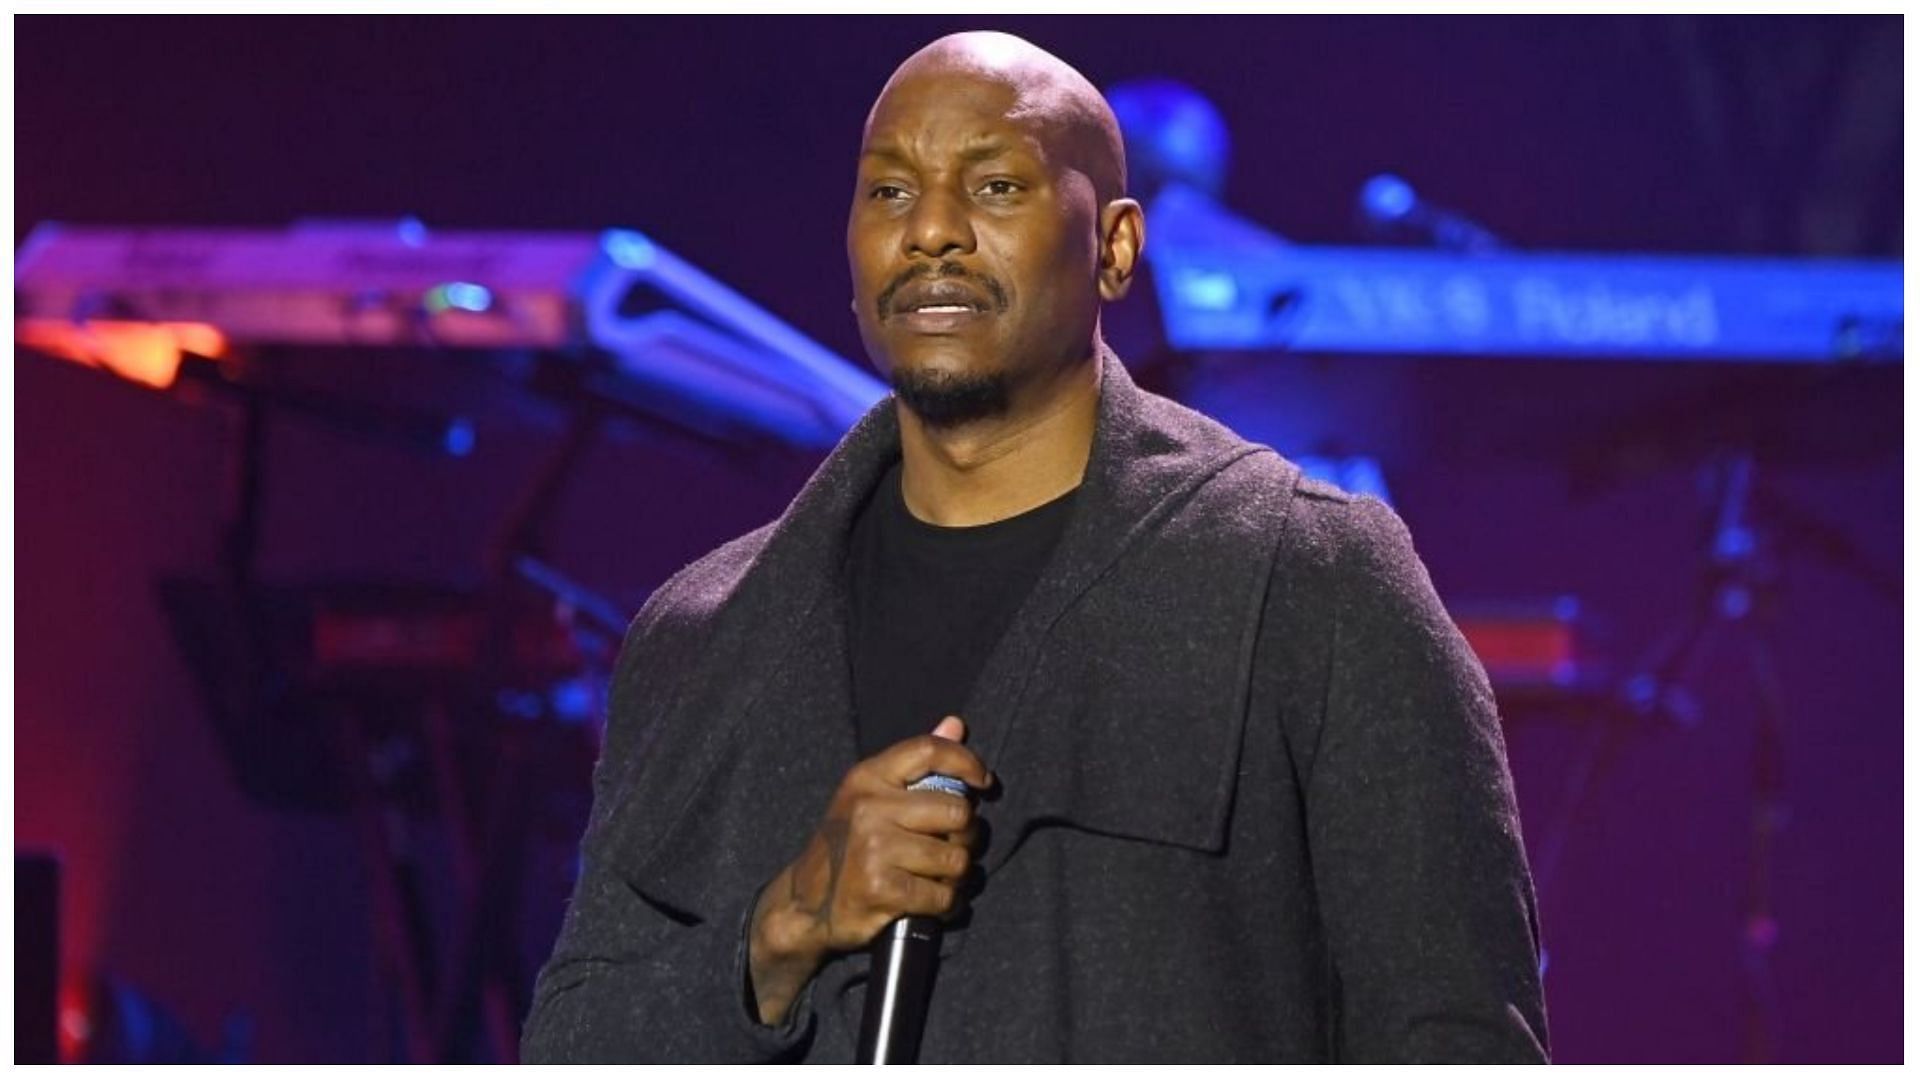 Tyrese Gibson has earned millions from his work in the entertainment industry (Image via Paras Griffin/Getty Images)